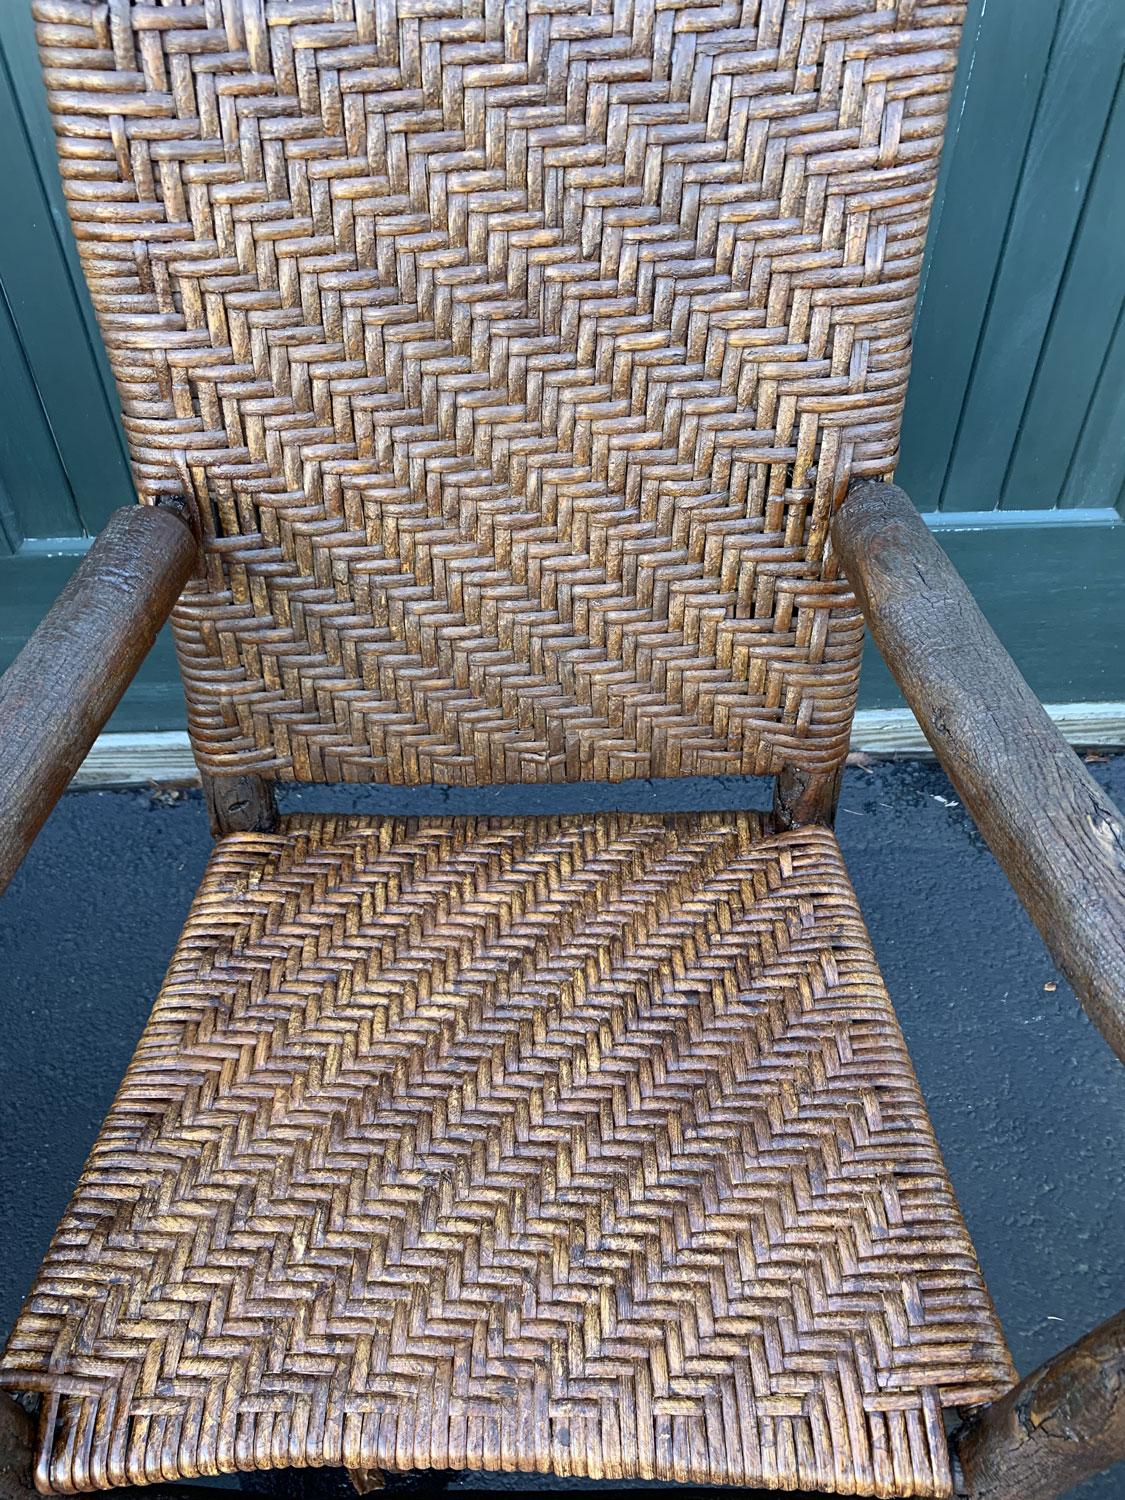 These amazing Old Hickory arm chairs from Martinsville,Indiana are made @ The Old Hickory Furniture Company.They are all hand made and hand woven seats and backs.These chairs are in pristine condition and have a gorgeous original patina.They all